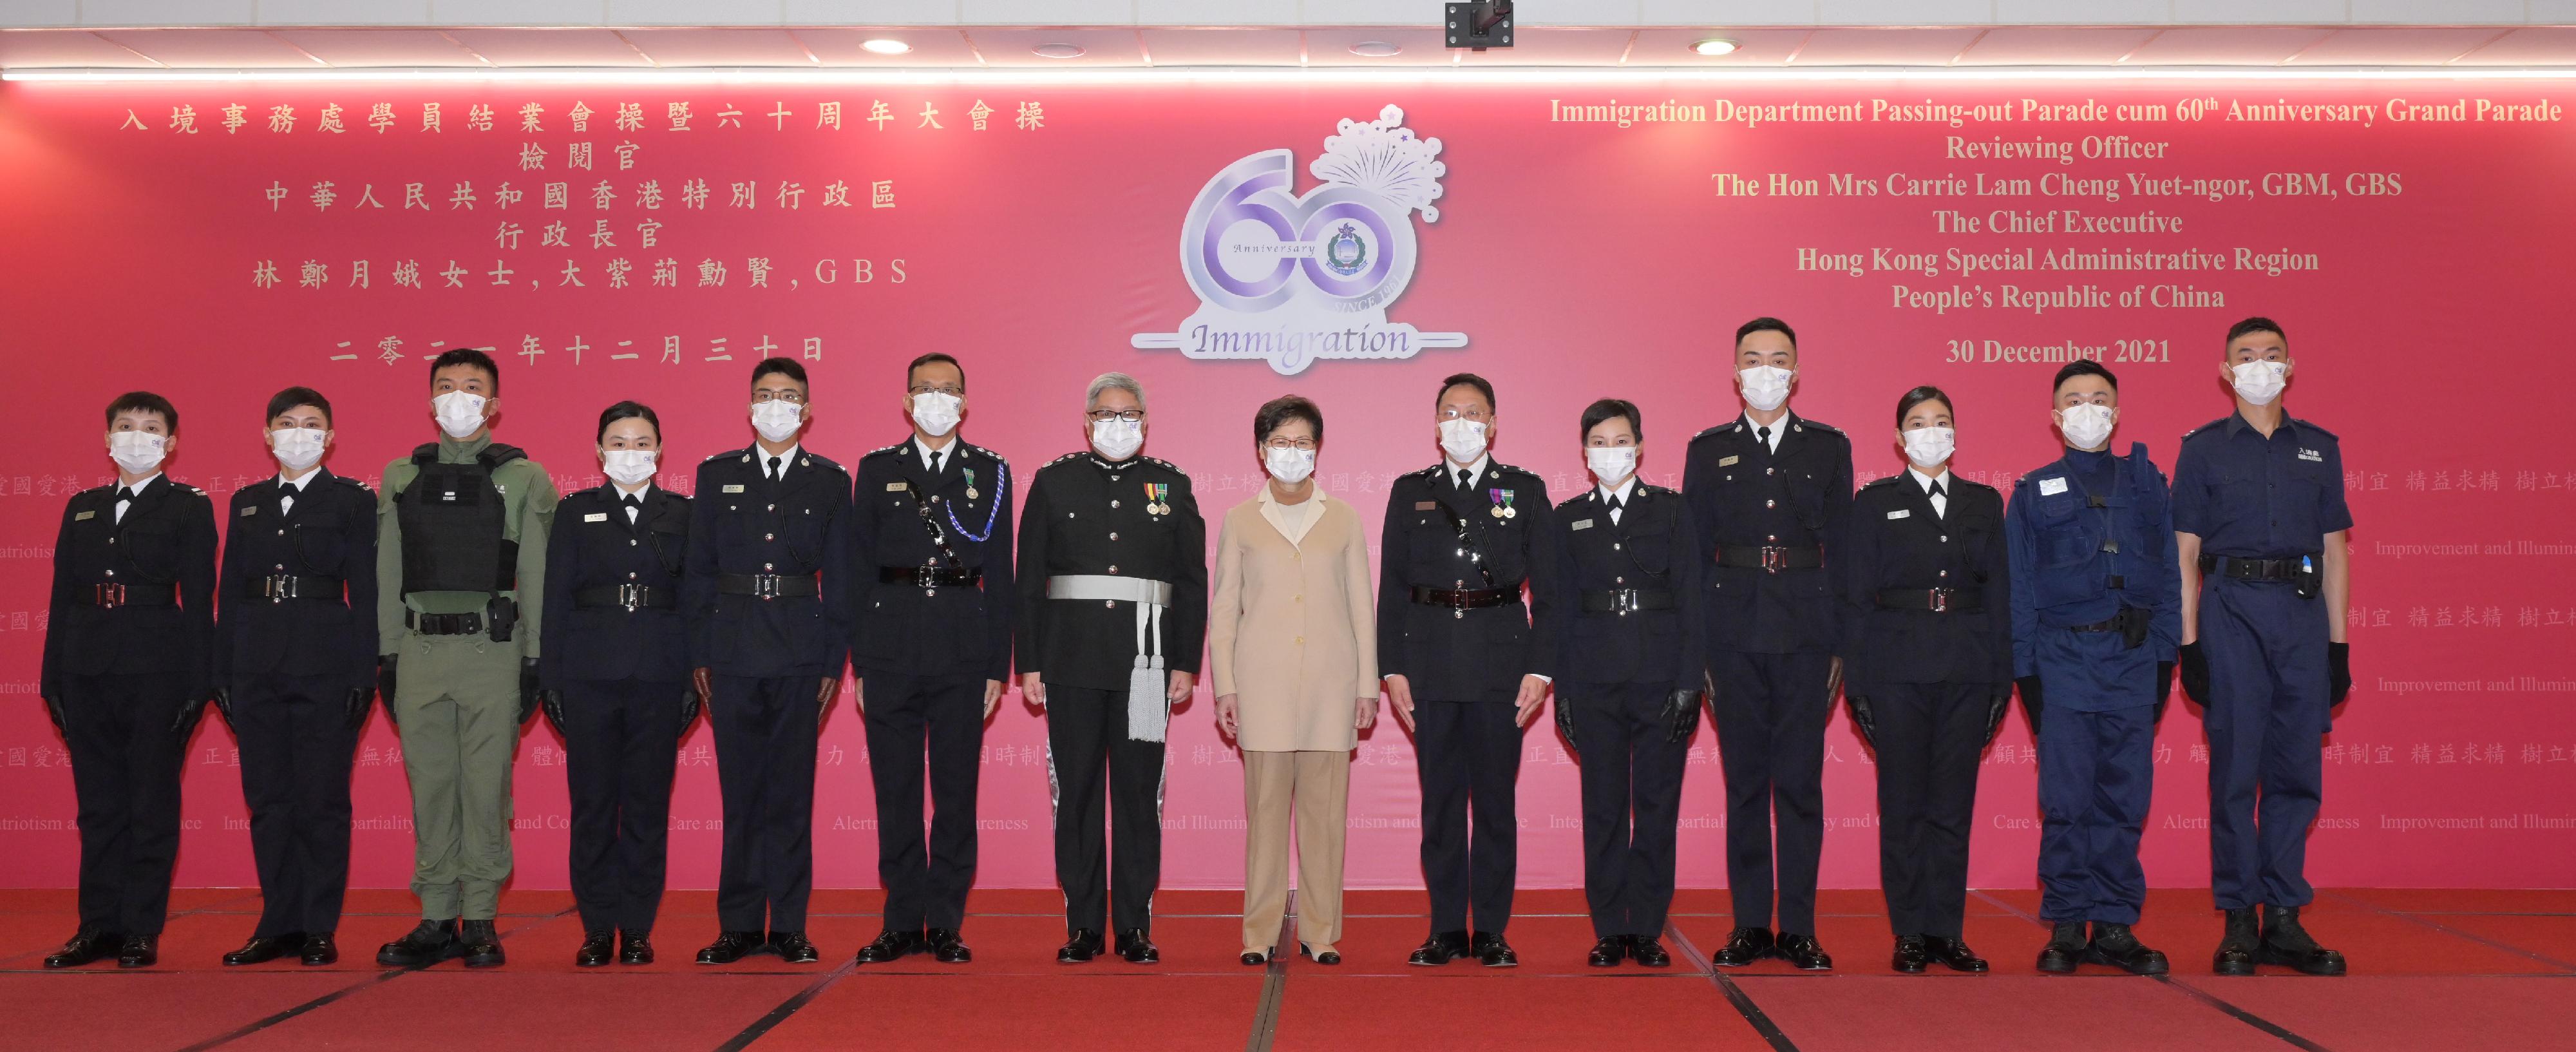 The Chief Executive, Mrs Carrie Lam (seventh right), is pictured with the Director of Immigration, Mr Au Ka-wang (seventh left), as well as graduates awarded with Best Recruit Shields and other guests after the Immigration Department Passing-out Parade cum 60th Anniversary Grand Parade today (December 30).